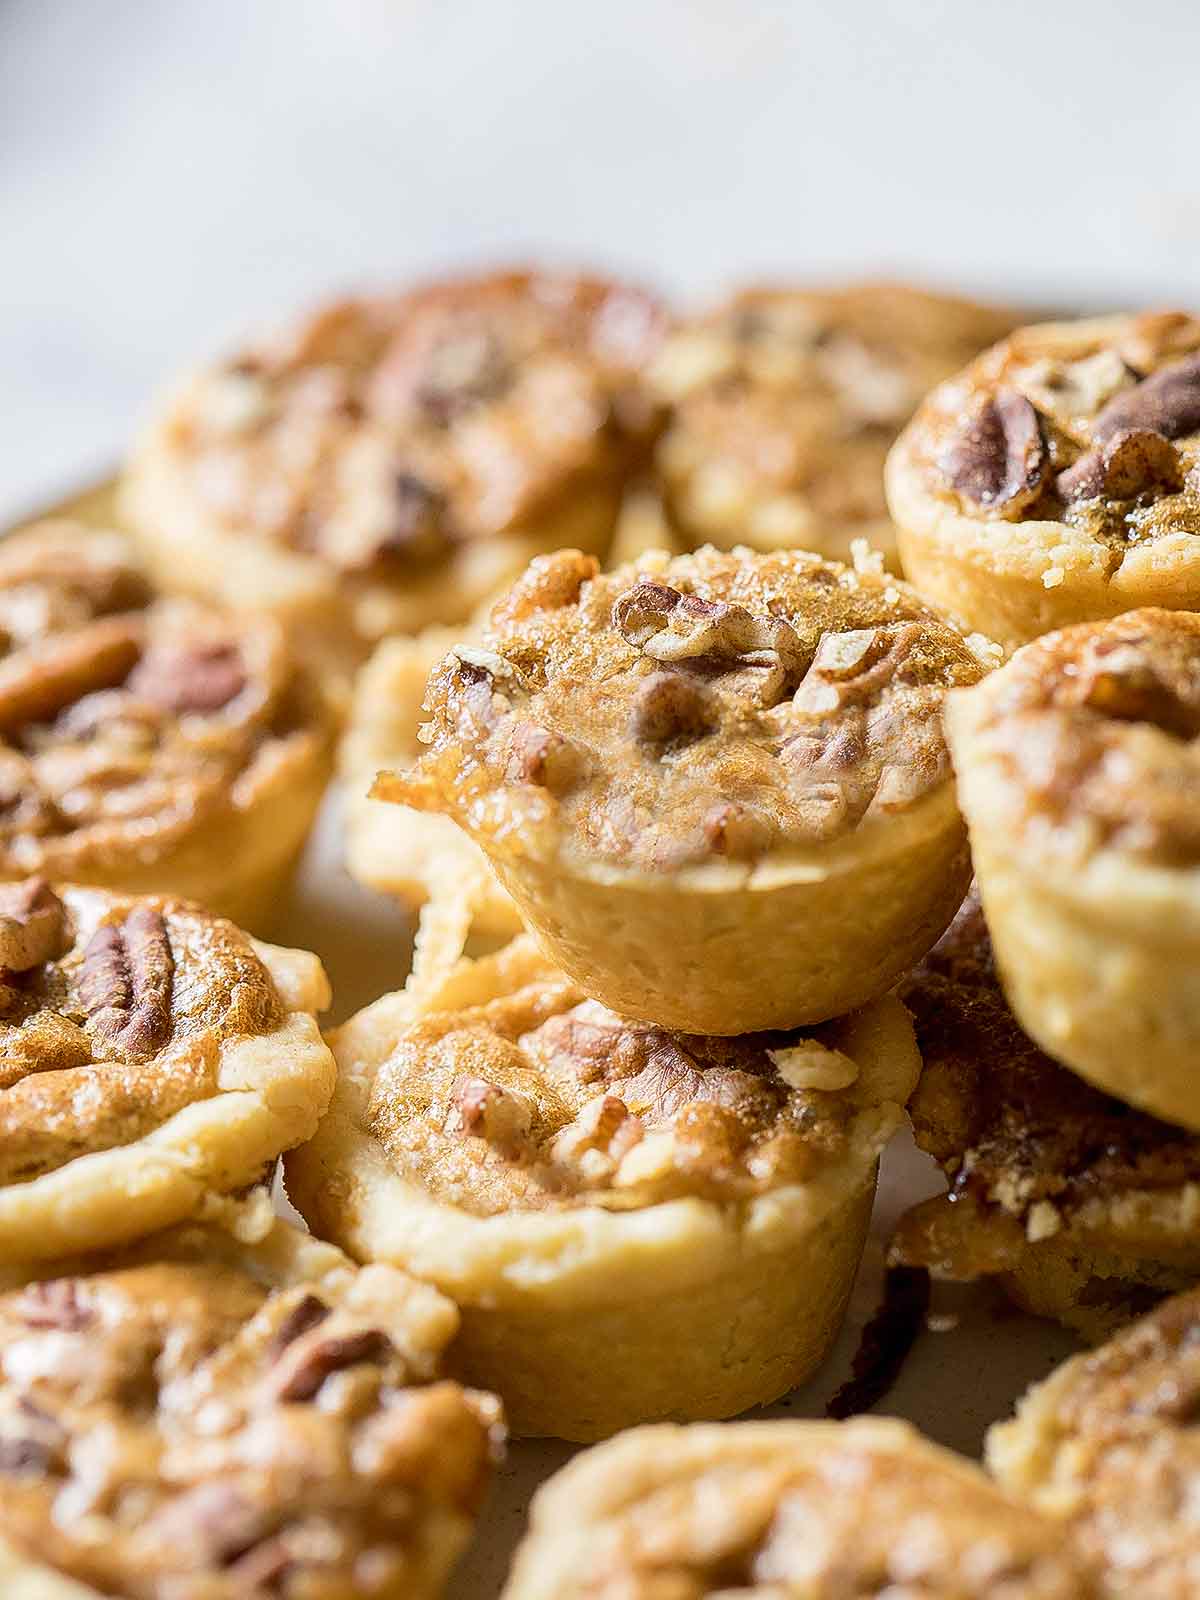 Pecan tassies in close-up, piled on top of each other.